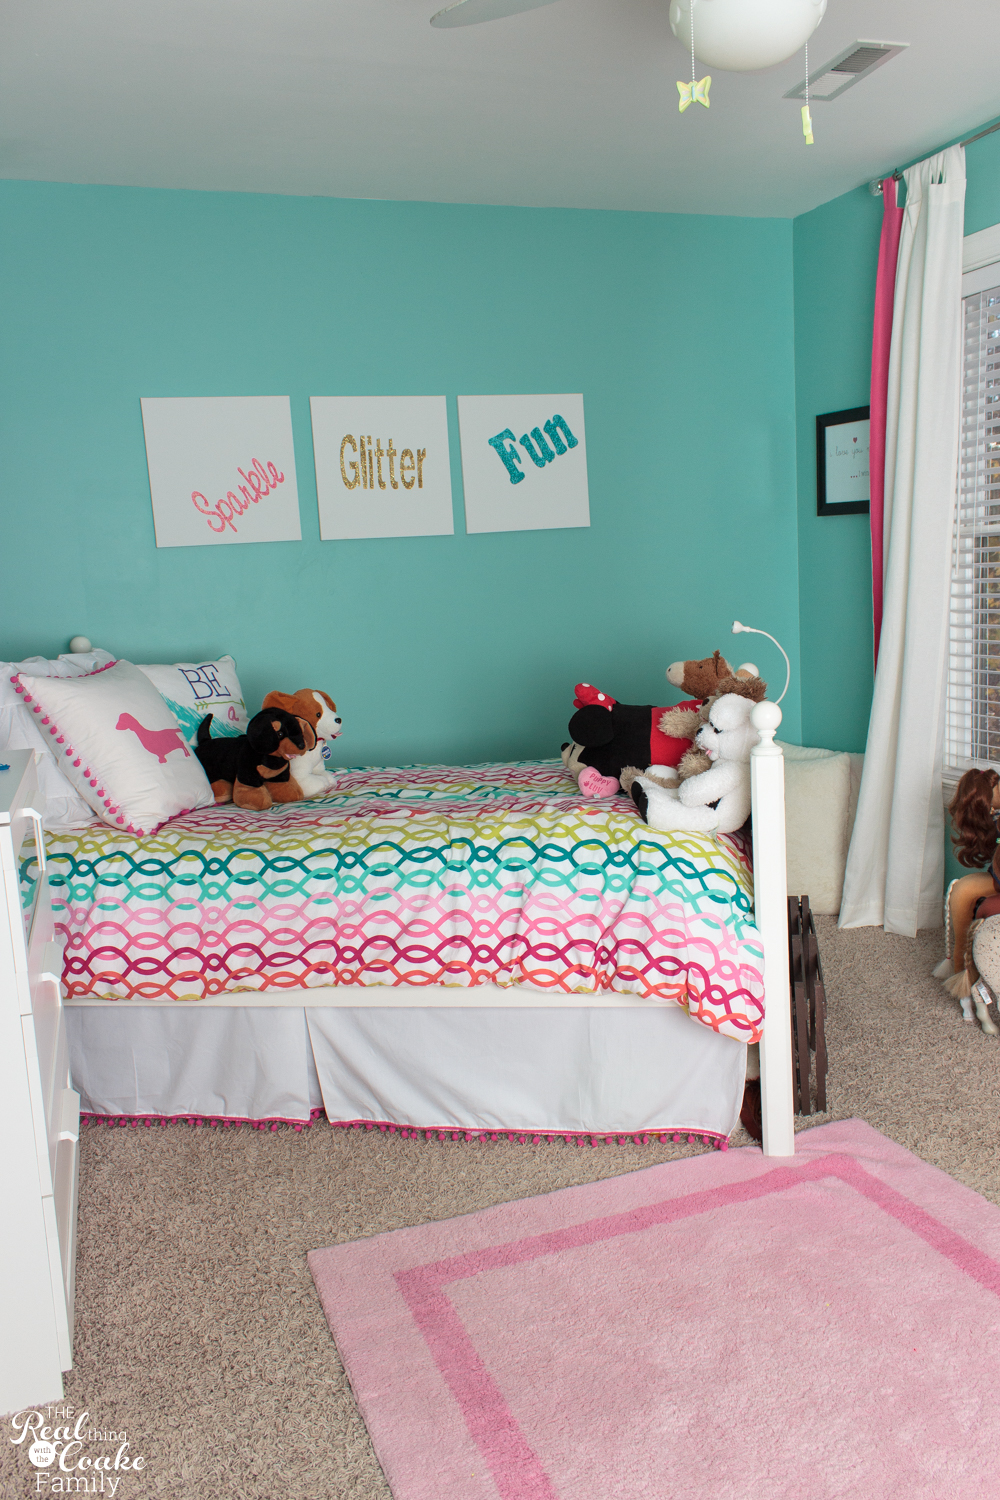  cute  bedroom  ideas 3 The Real Thing with the Coake Family